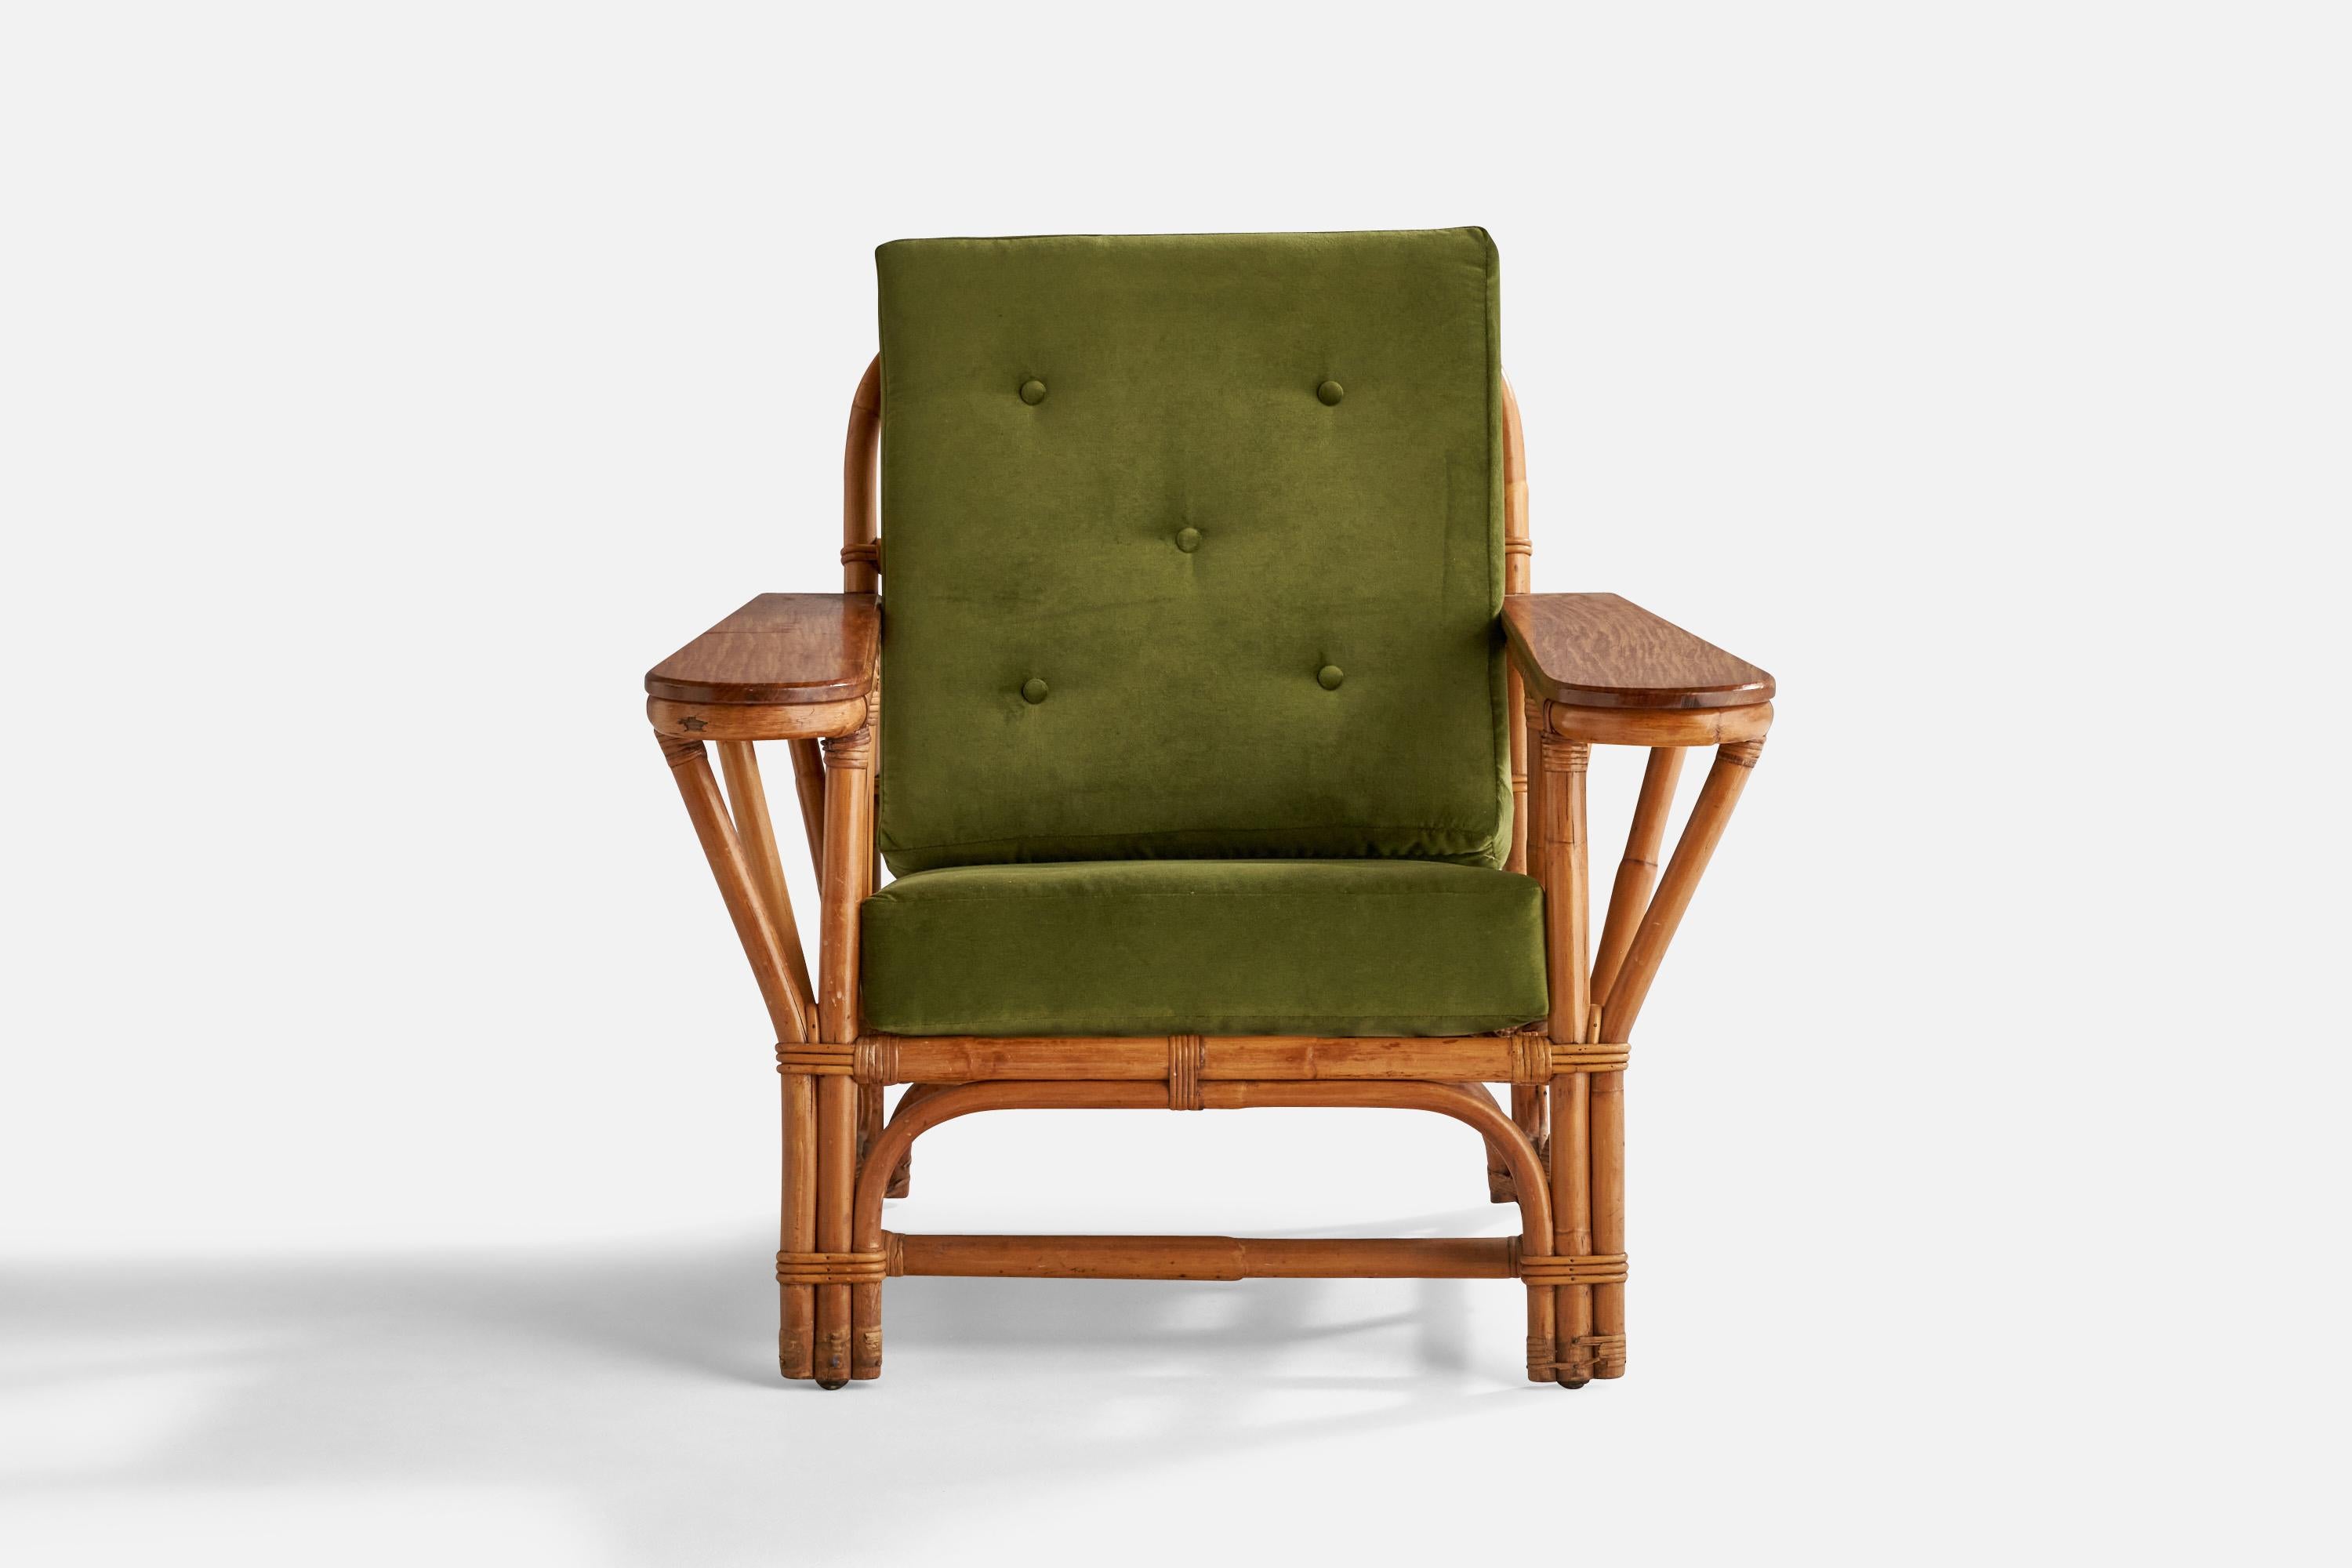 1940s chair